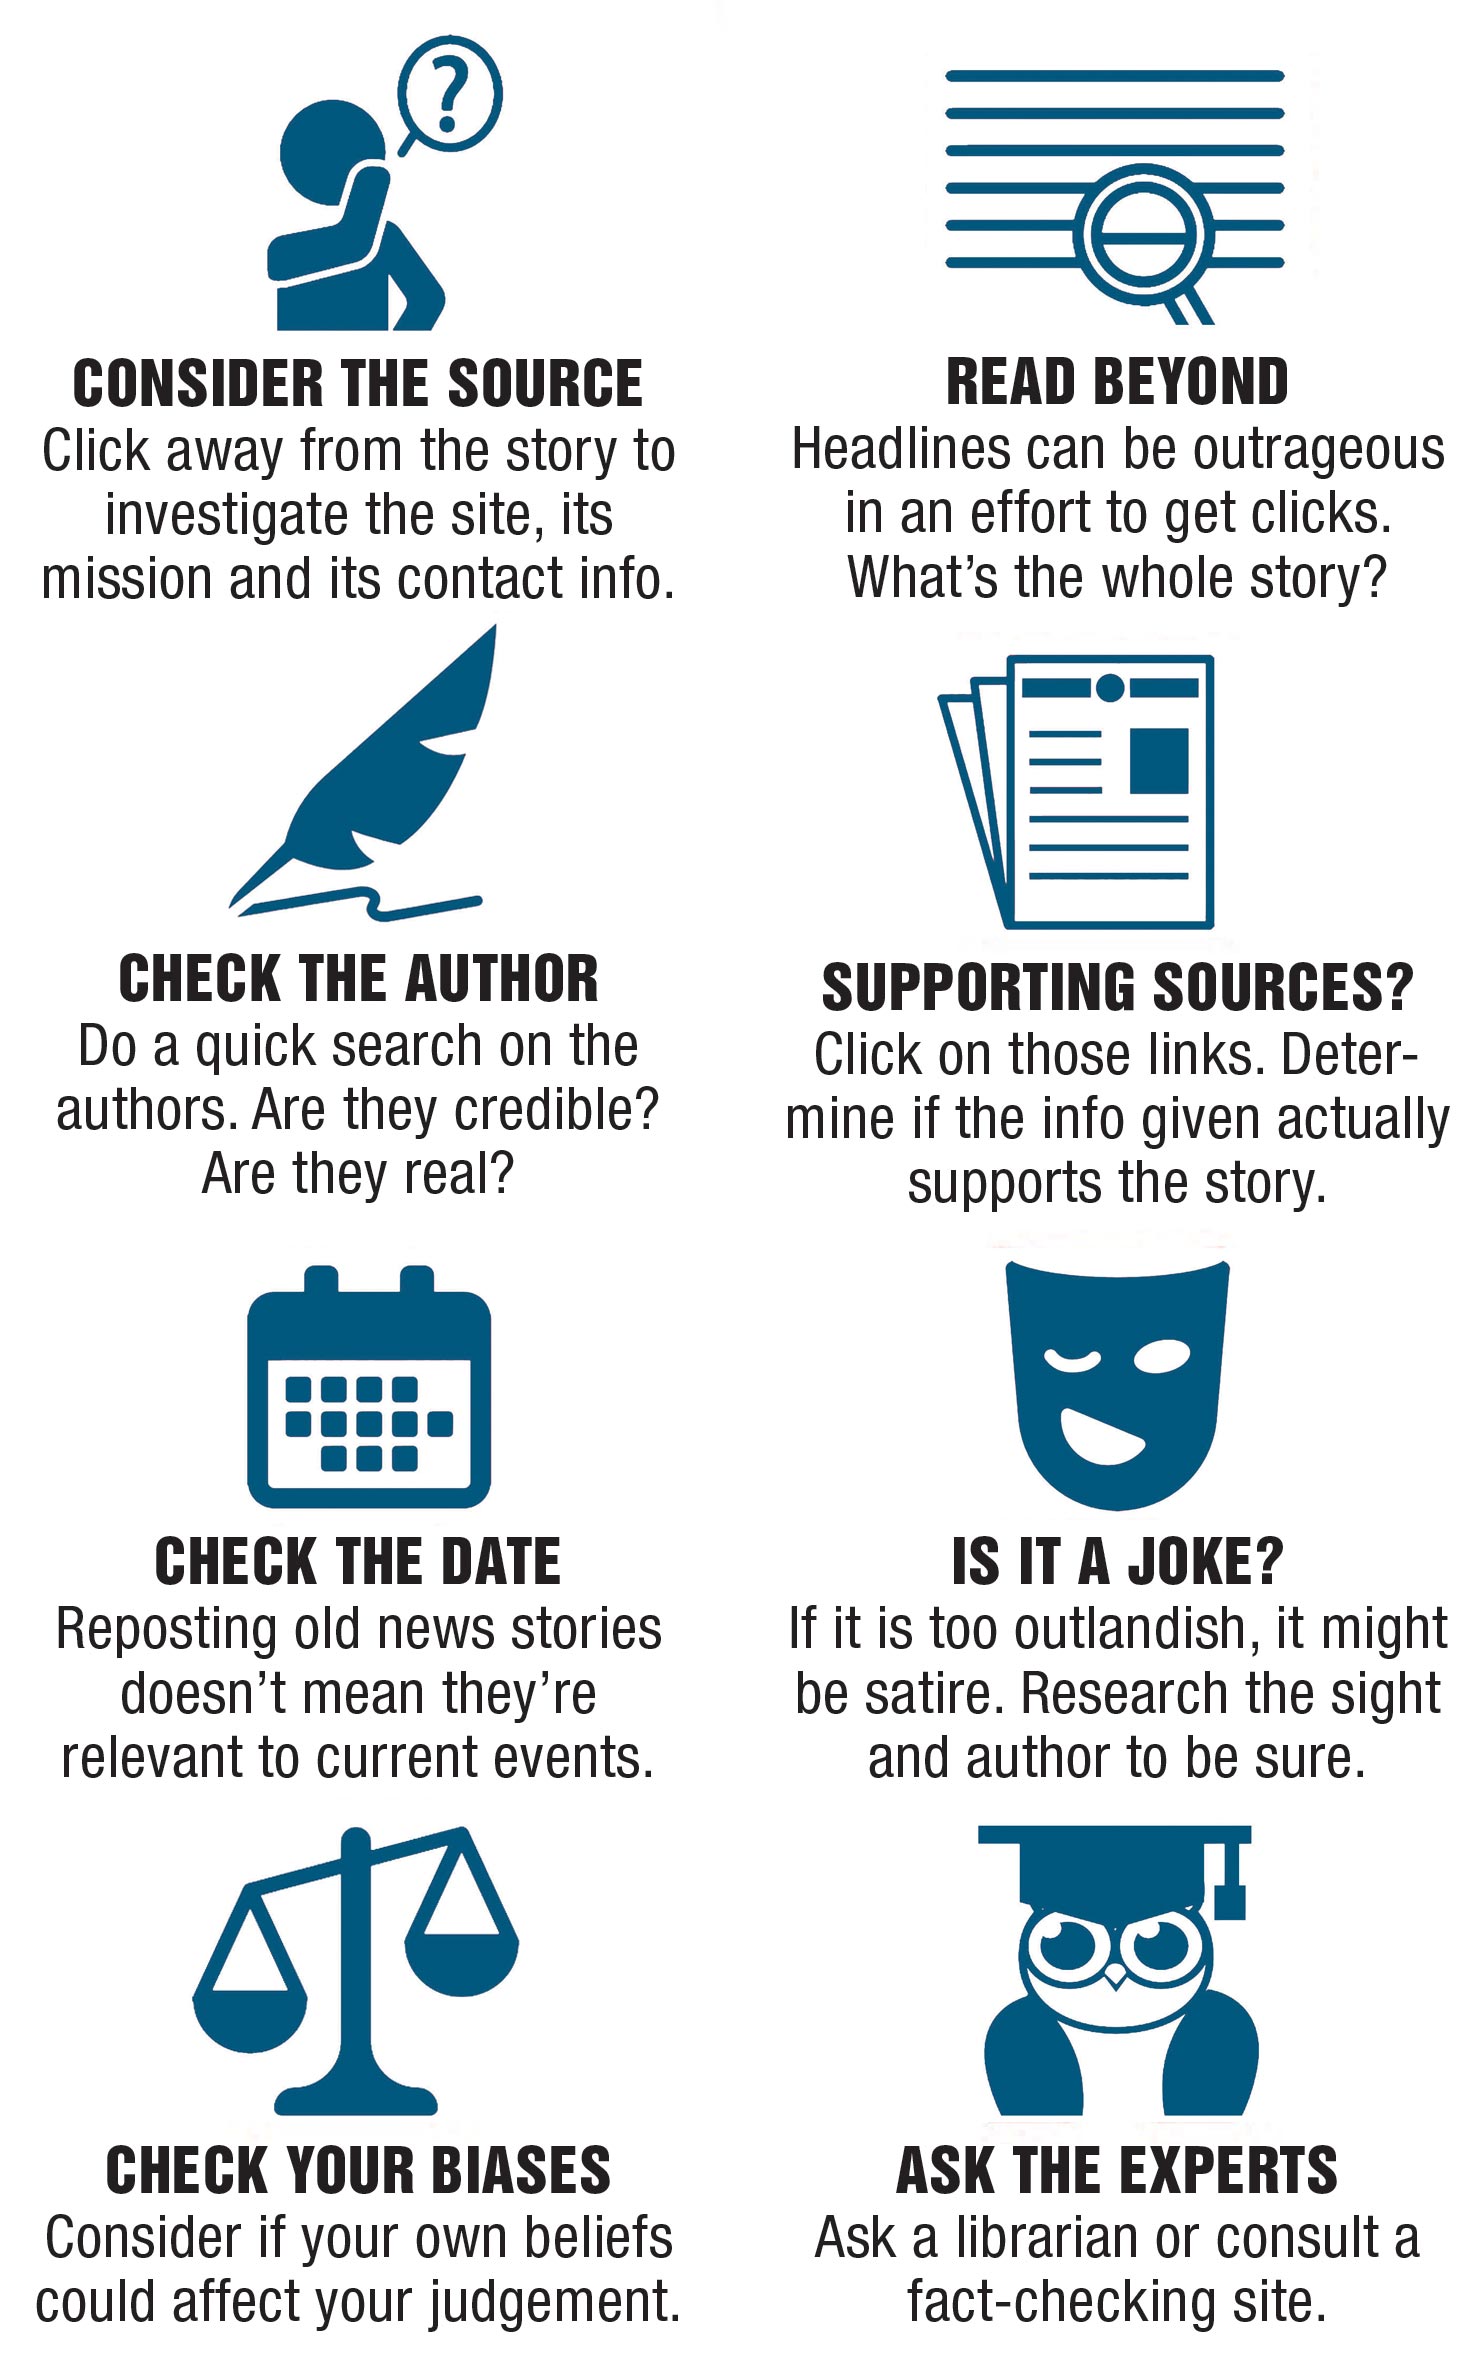 IFLA Repository: How To Spot Fake News